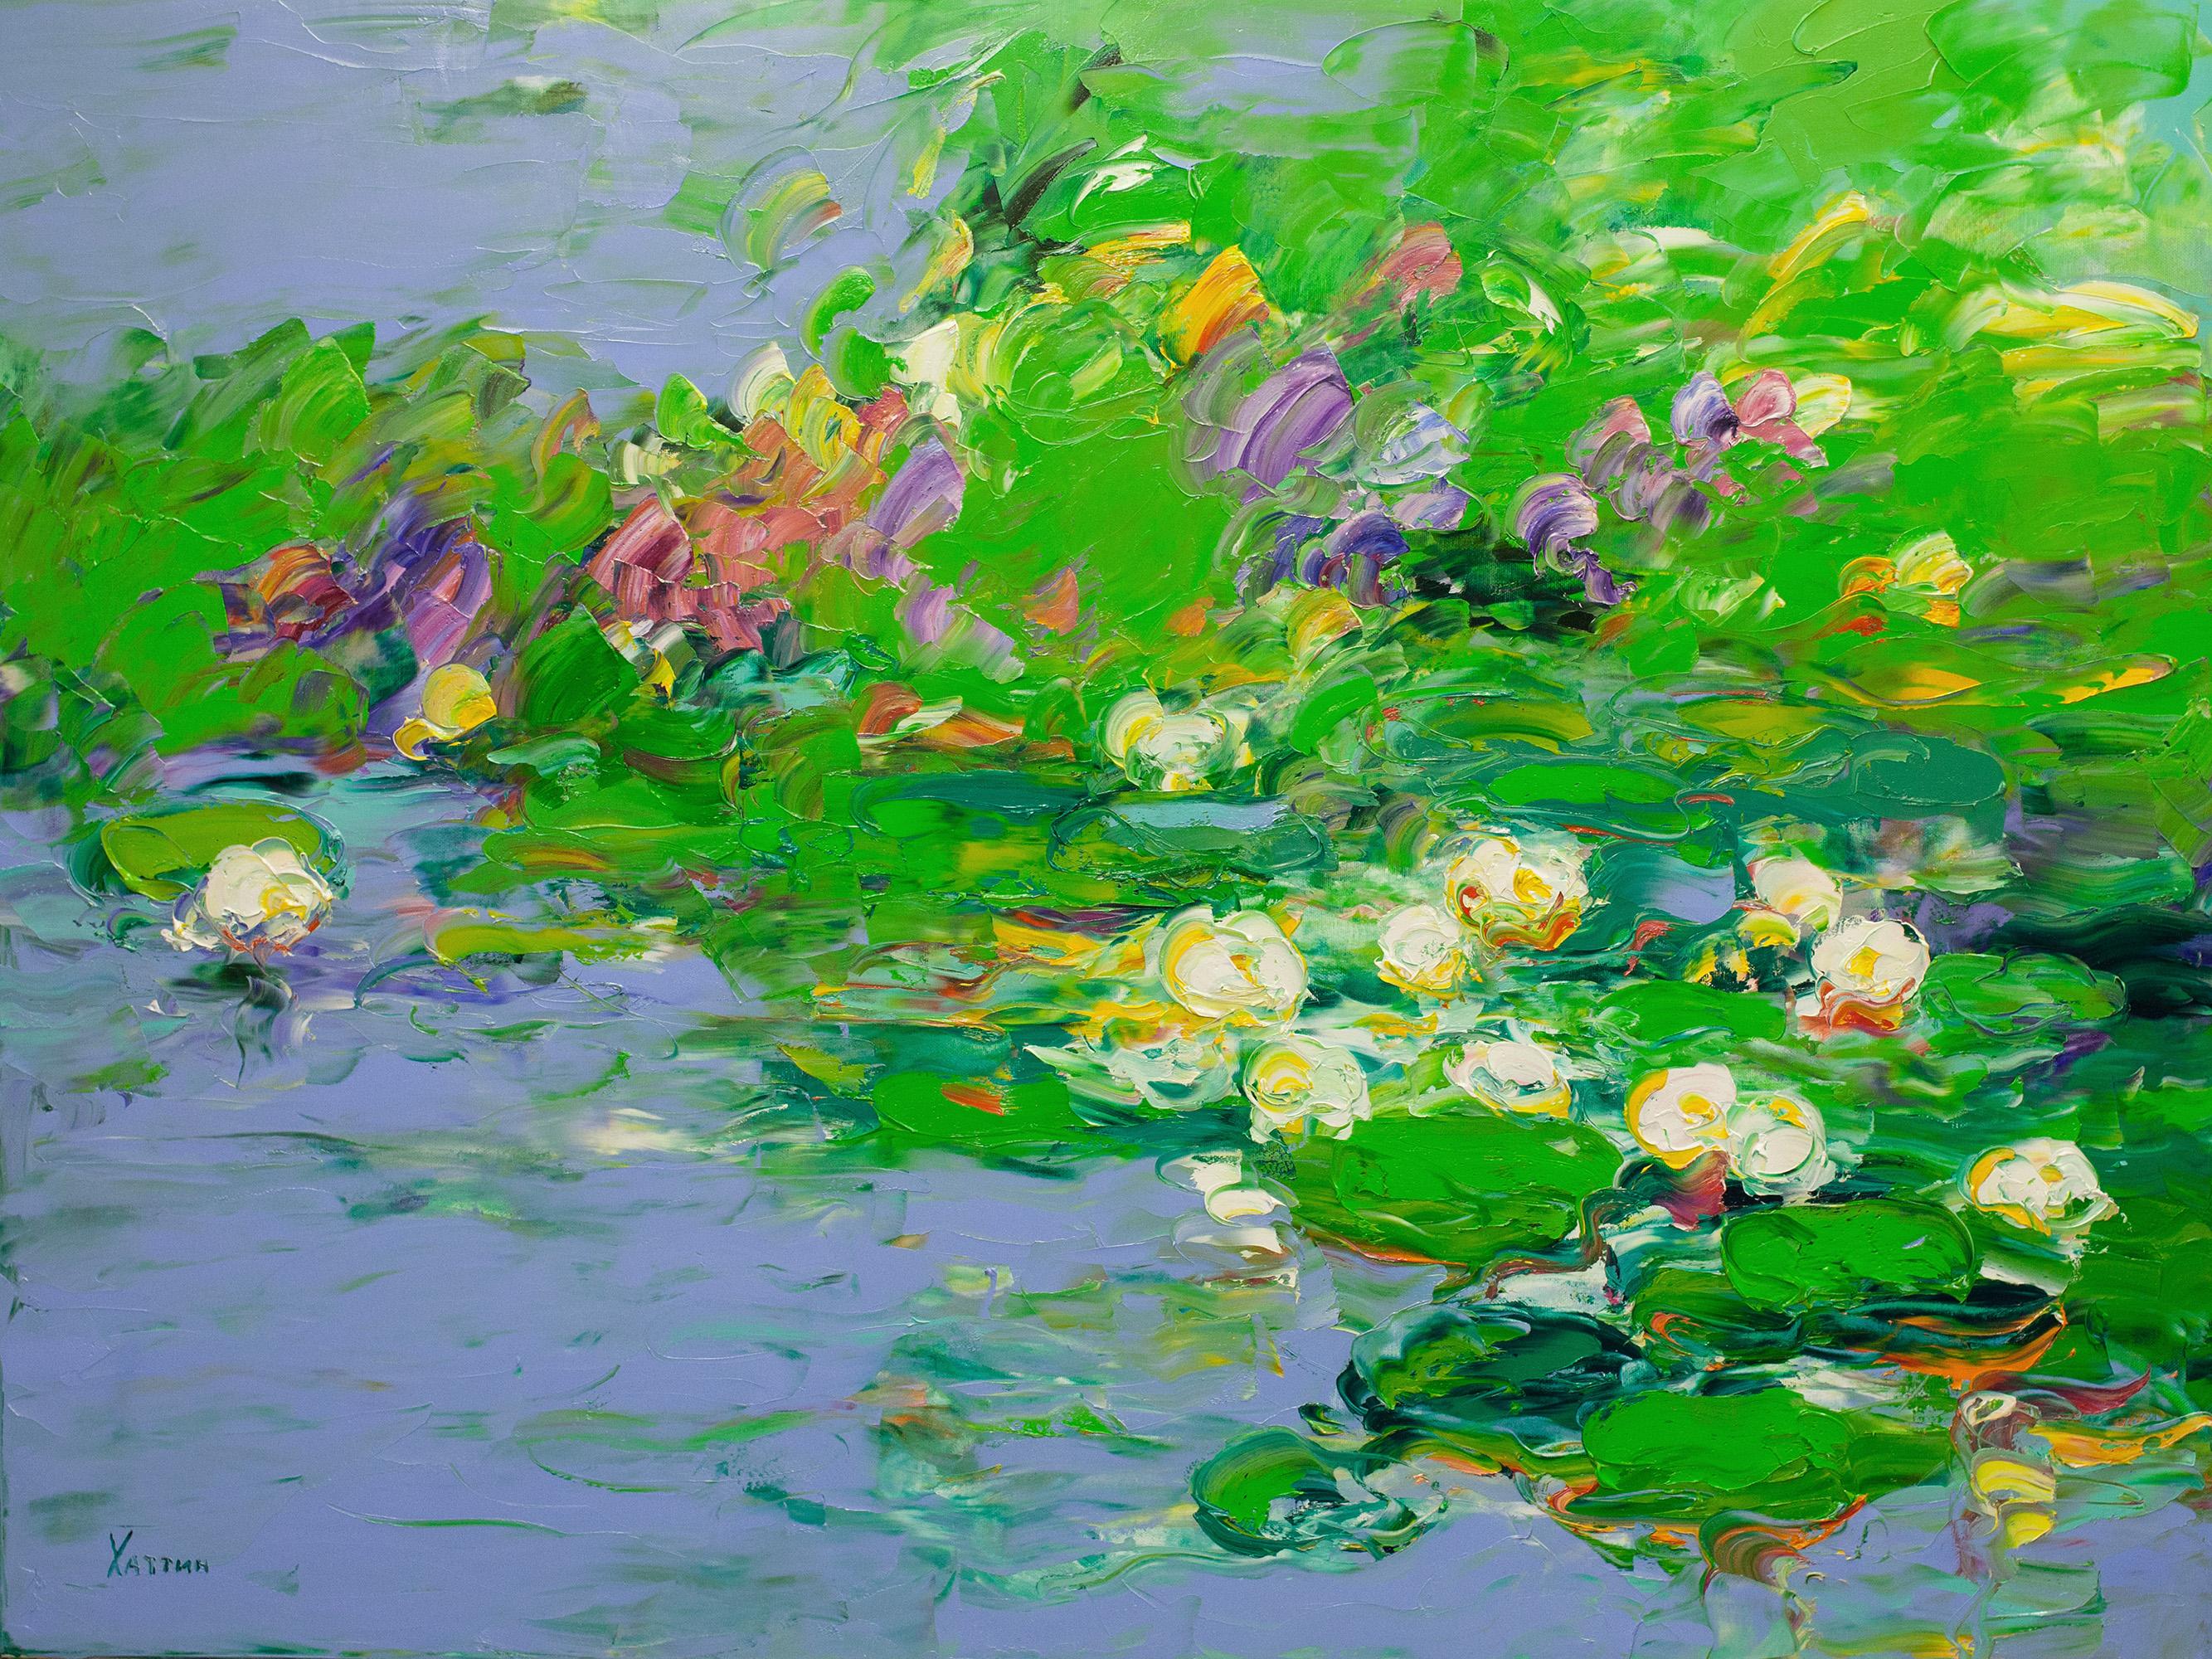 Abstract Painting Valery Khattin - Bloom on the Water-original abstract floral landscape painting-contemporary Art